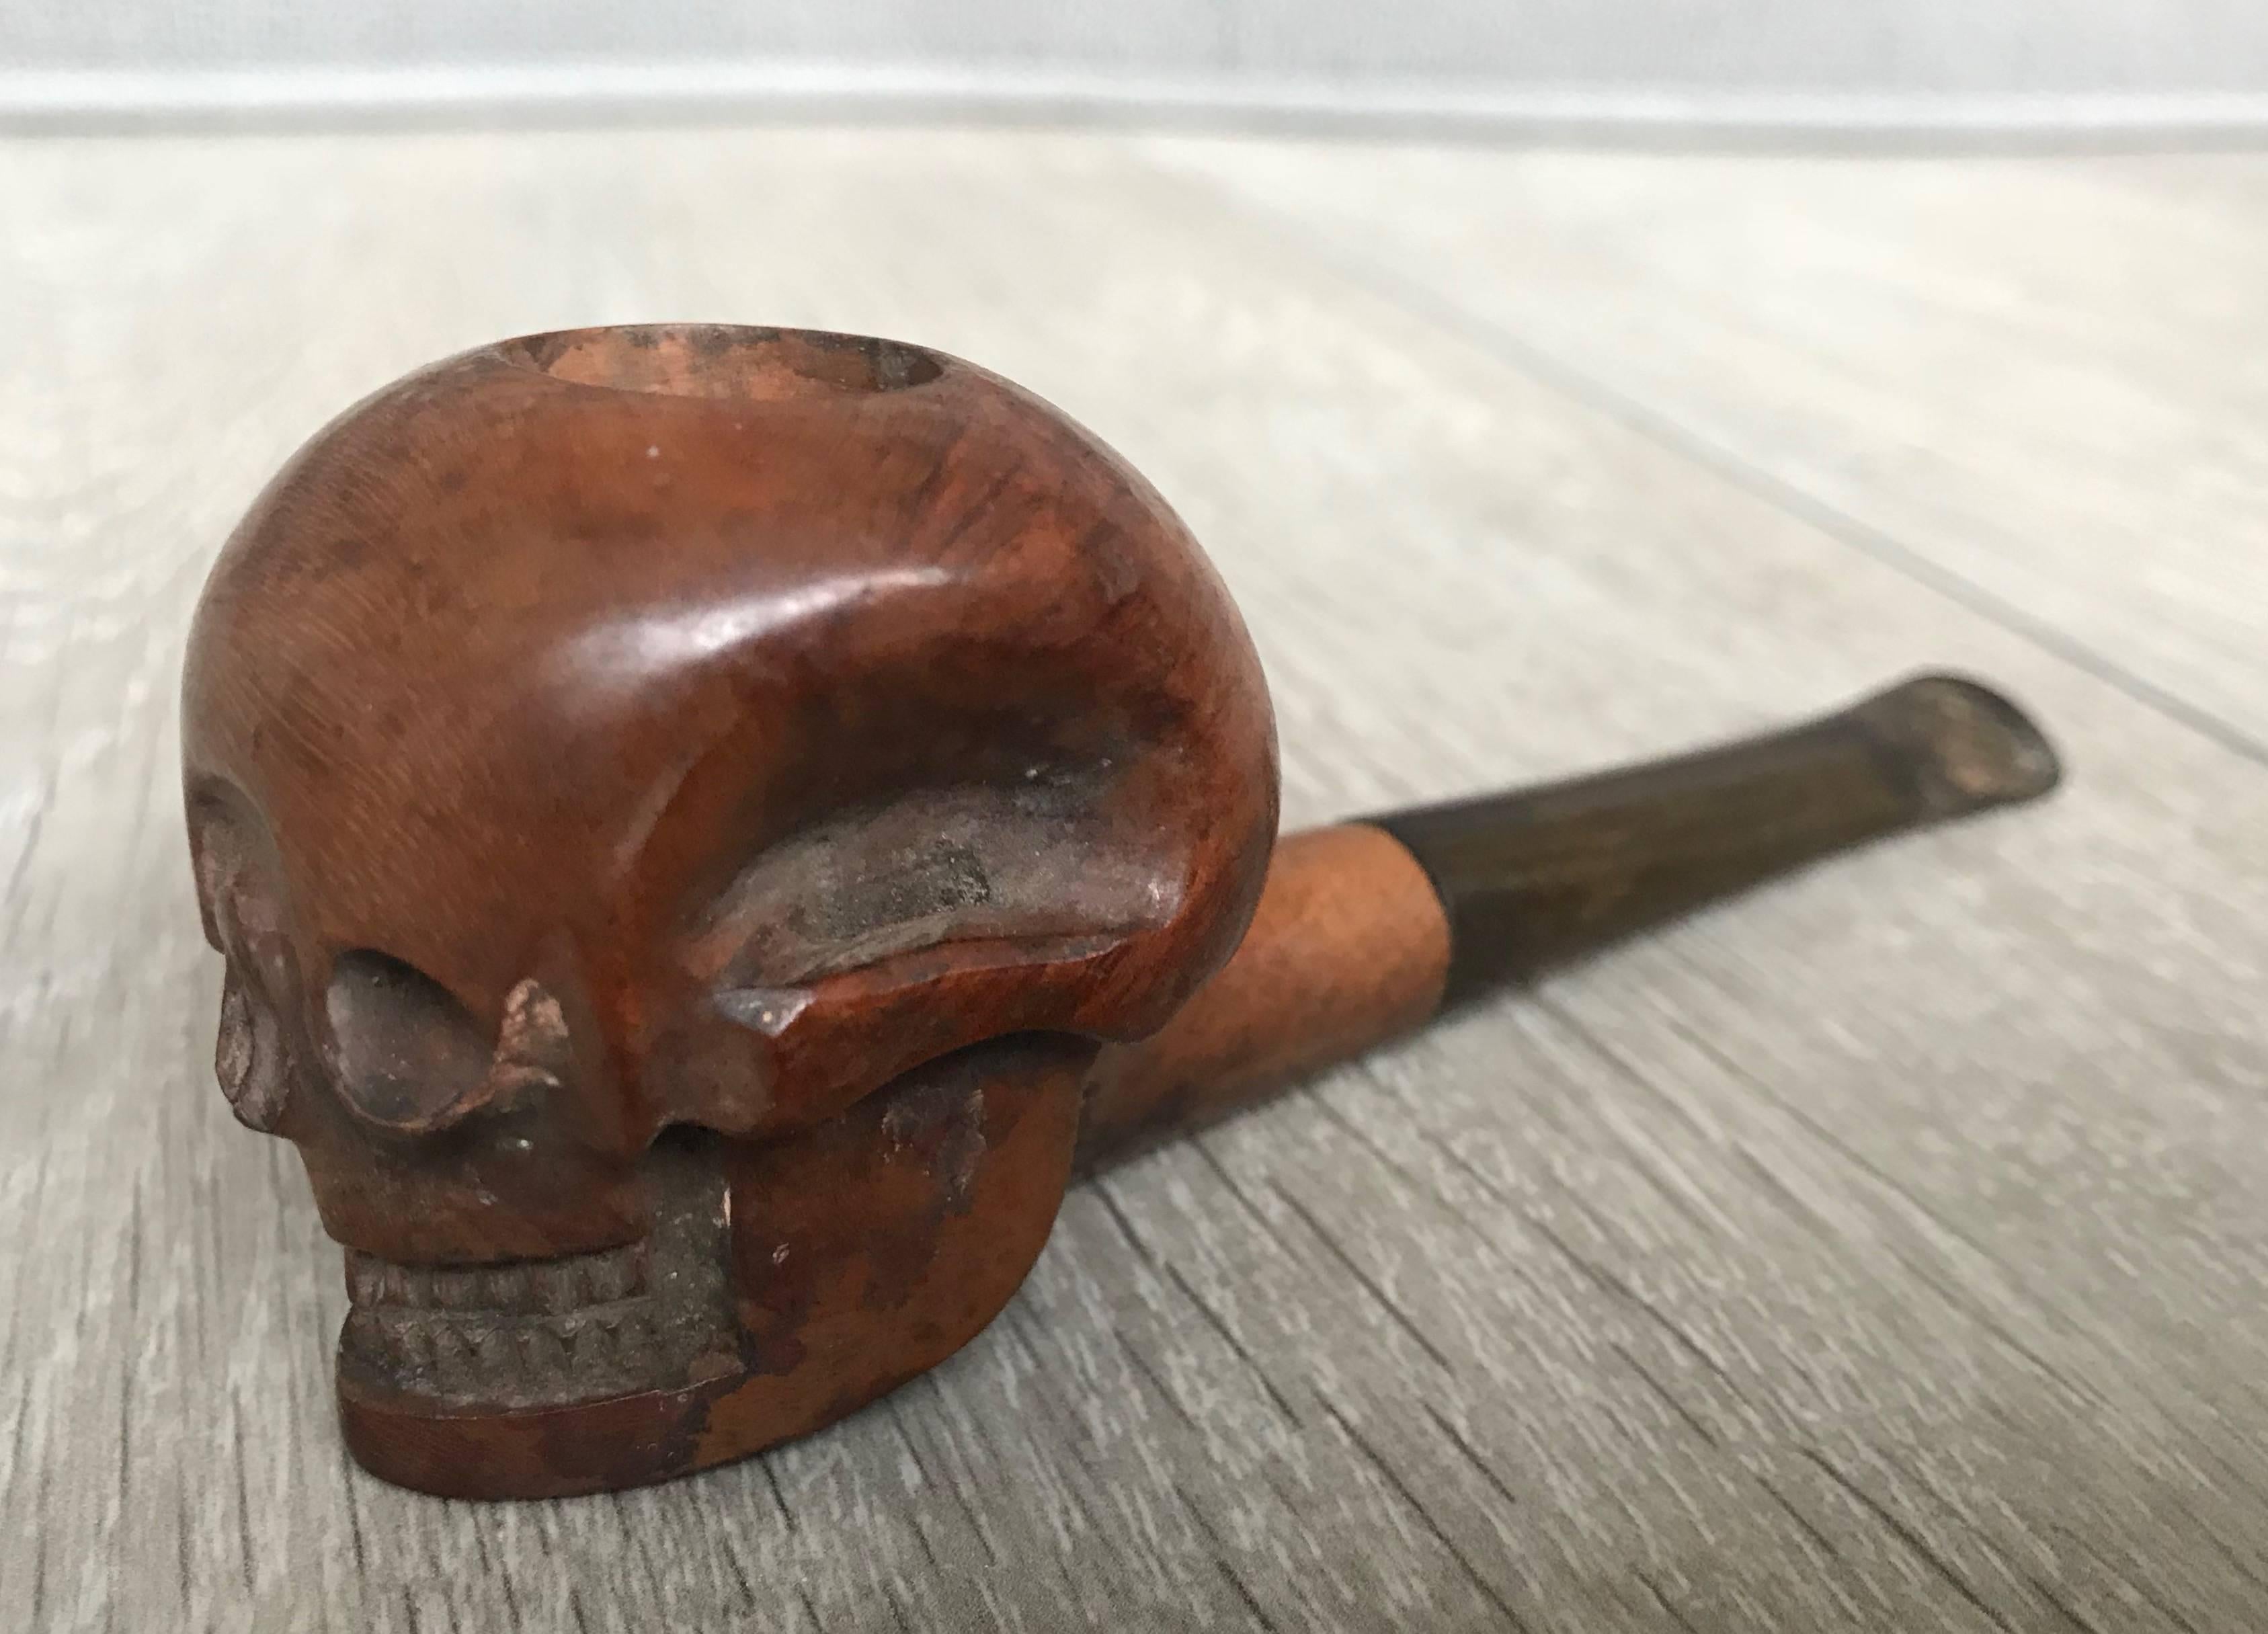 Folk Art pipe that will turn some heads.

This out of the ordinary antique pipe is a real eye catcher. The hand-carved, solid burl walnut skull has the most beautiful patina and it actually is very comfortable to hold in your hand. Thanks to the